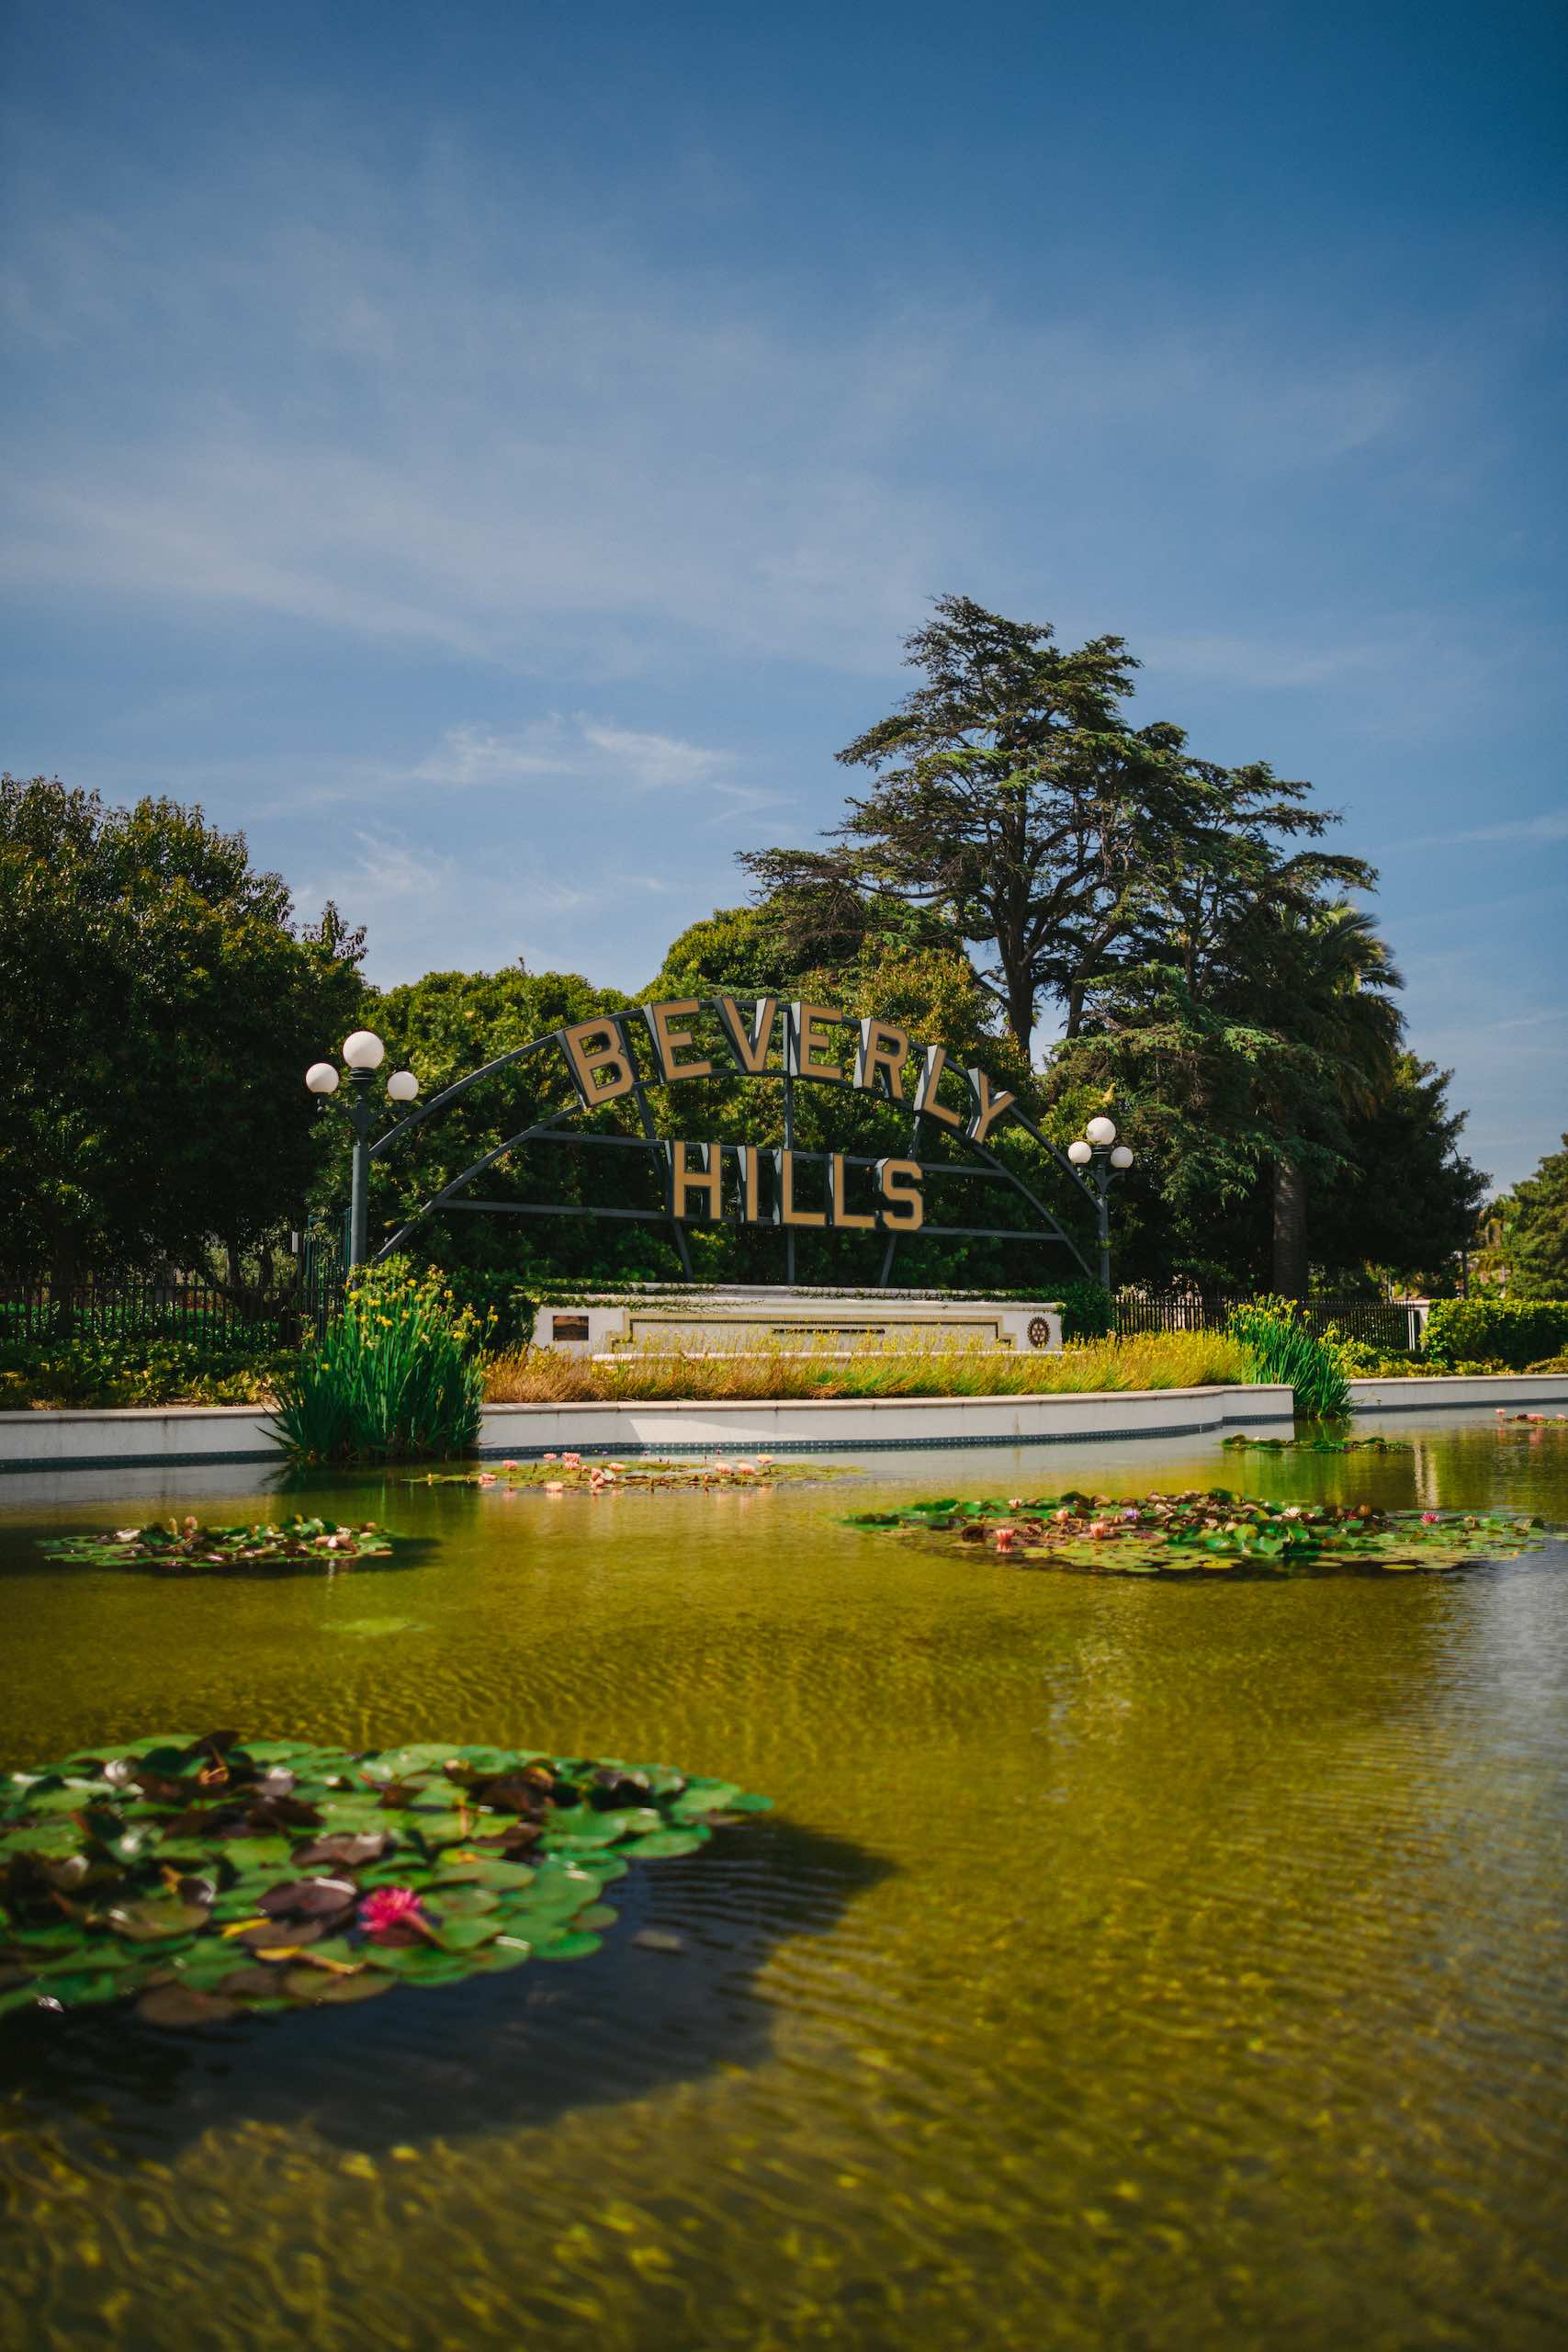 IU C&I Studios Portfolio Peretti Italy branding and photography Beverly Hills sign in a park